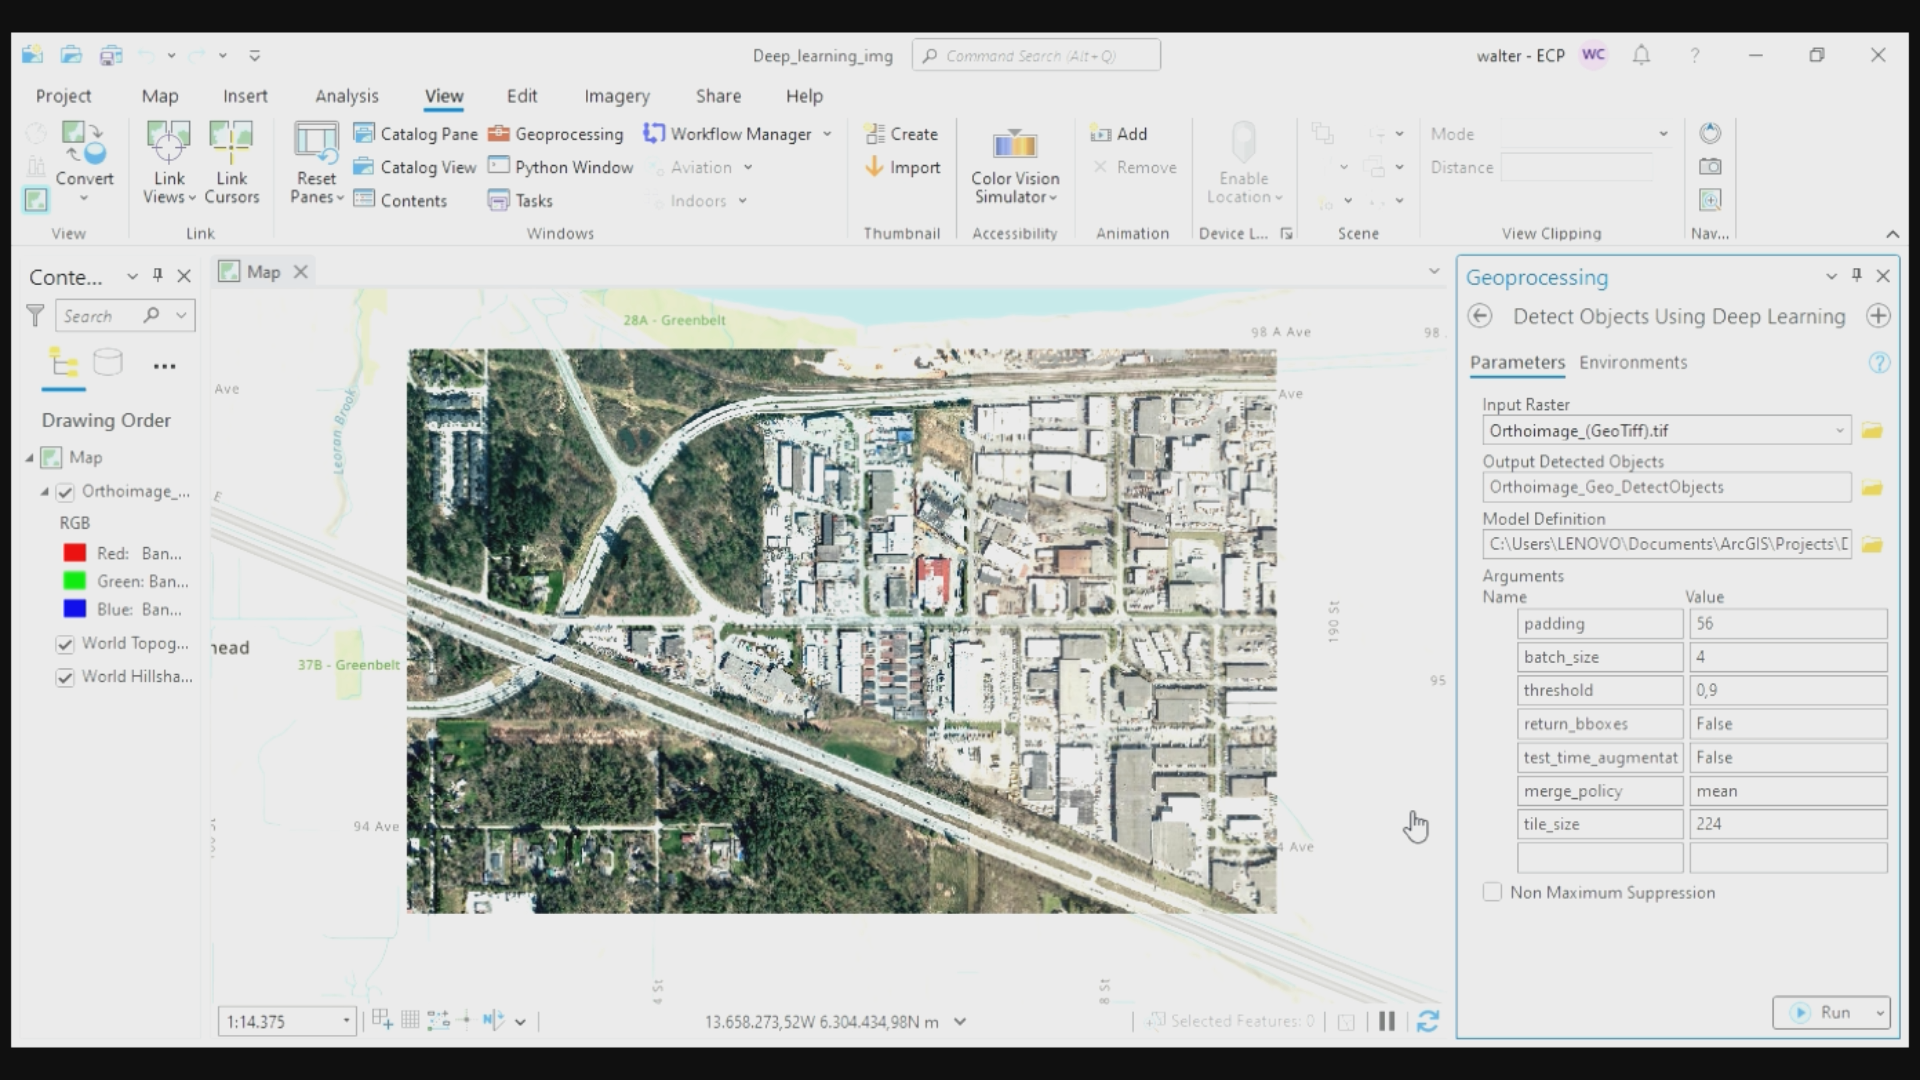 Detect Objects through Deep Learning in ArcGIS Pro - How to Run the Training Model